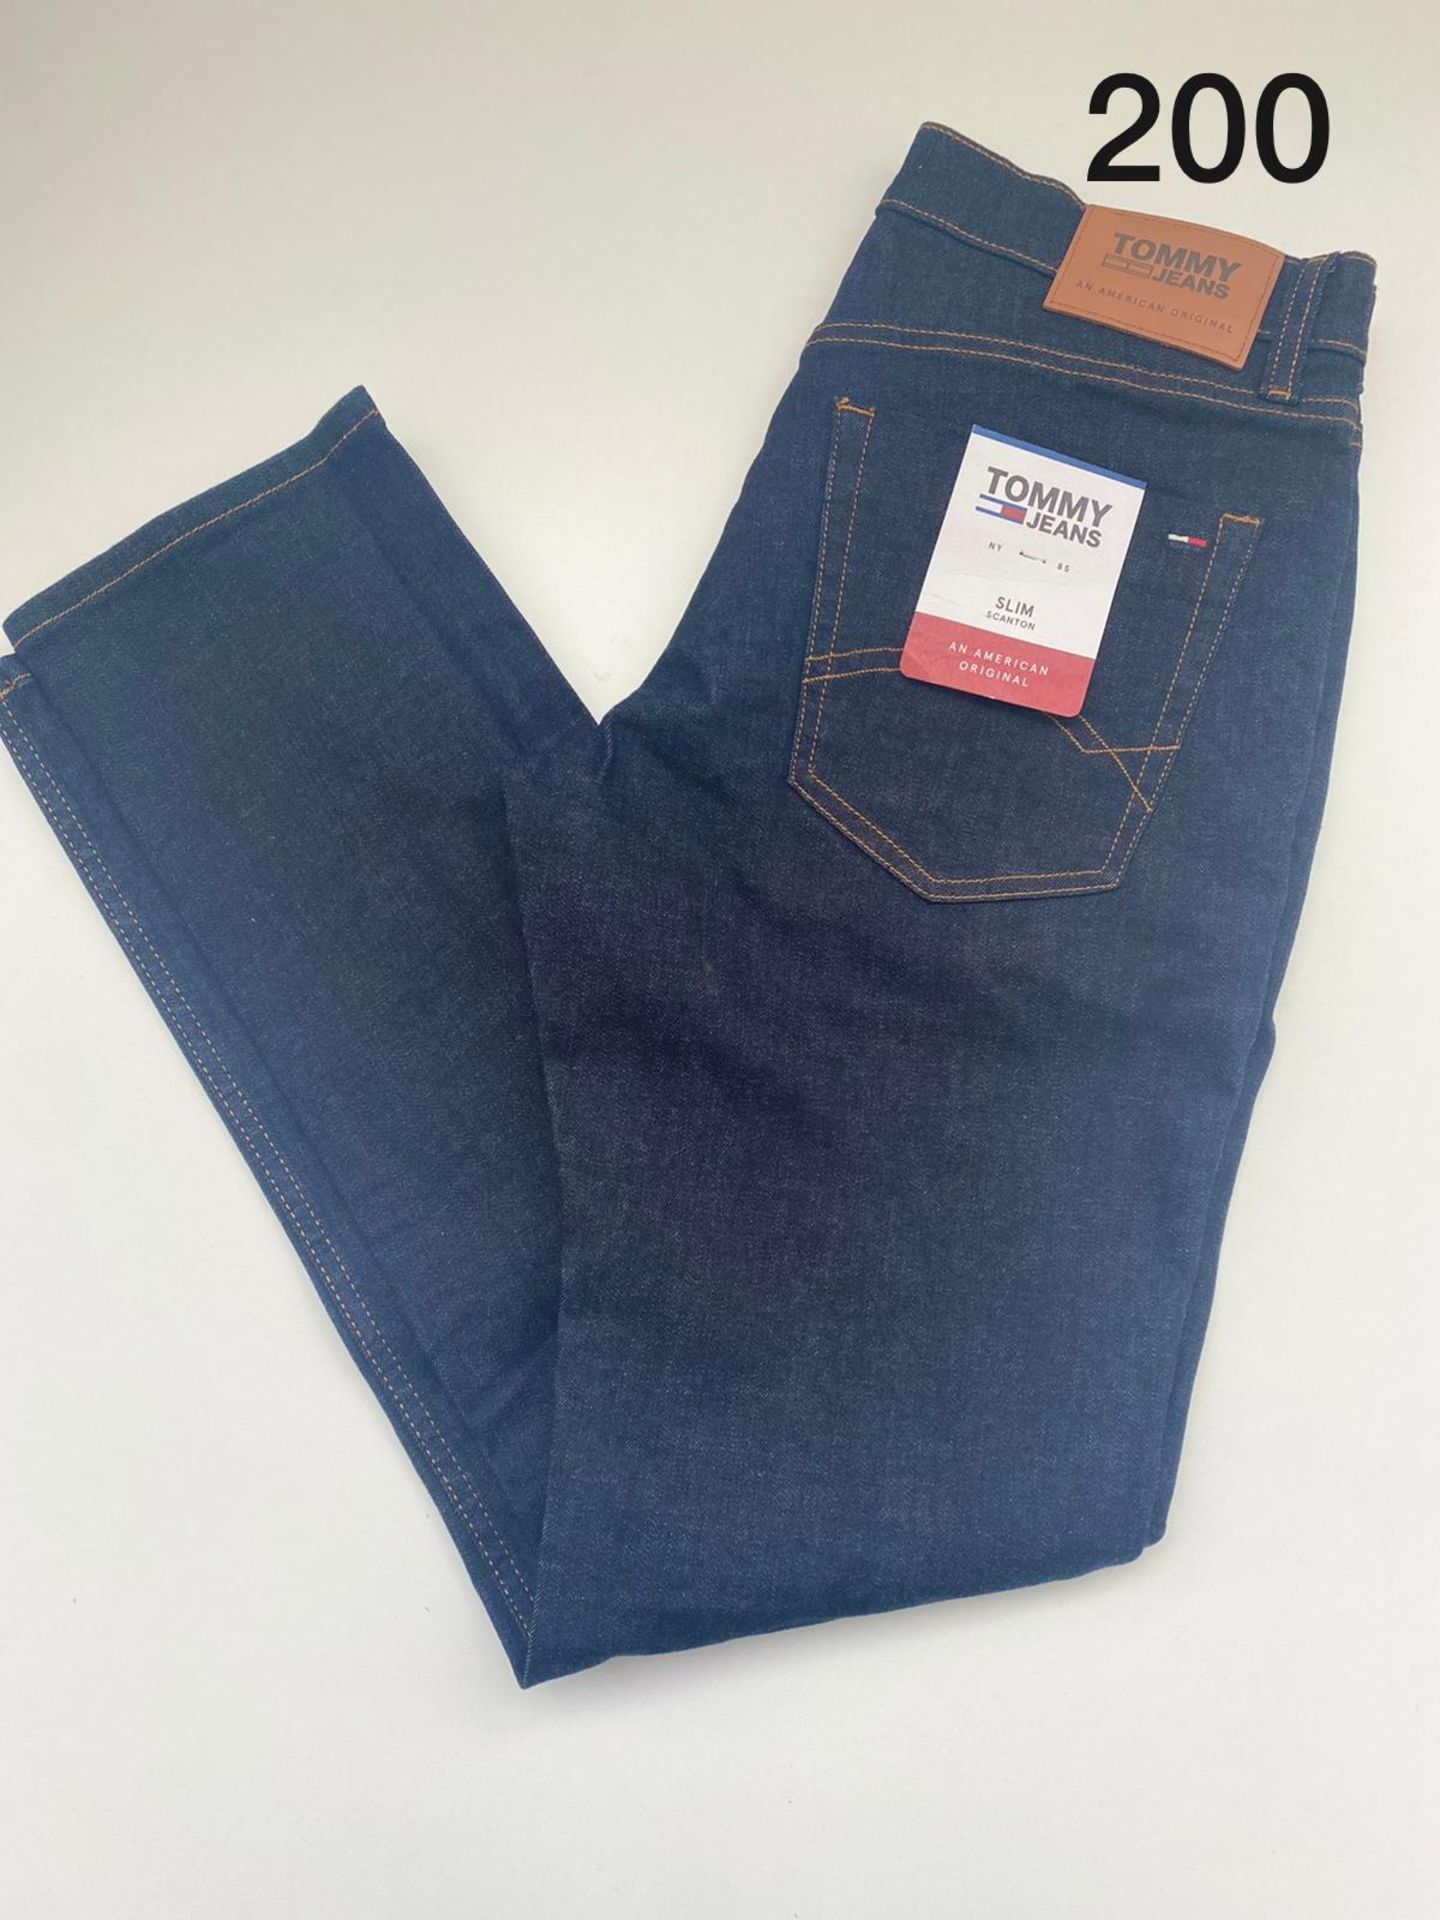 MENS TOMMY JEANS SCANTON 32/32 RRP £95 200